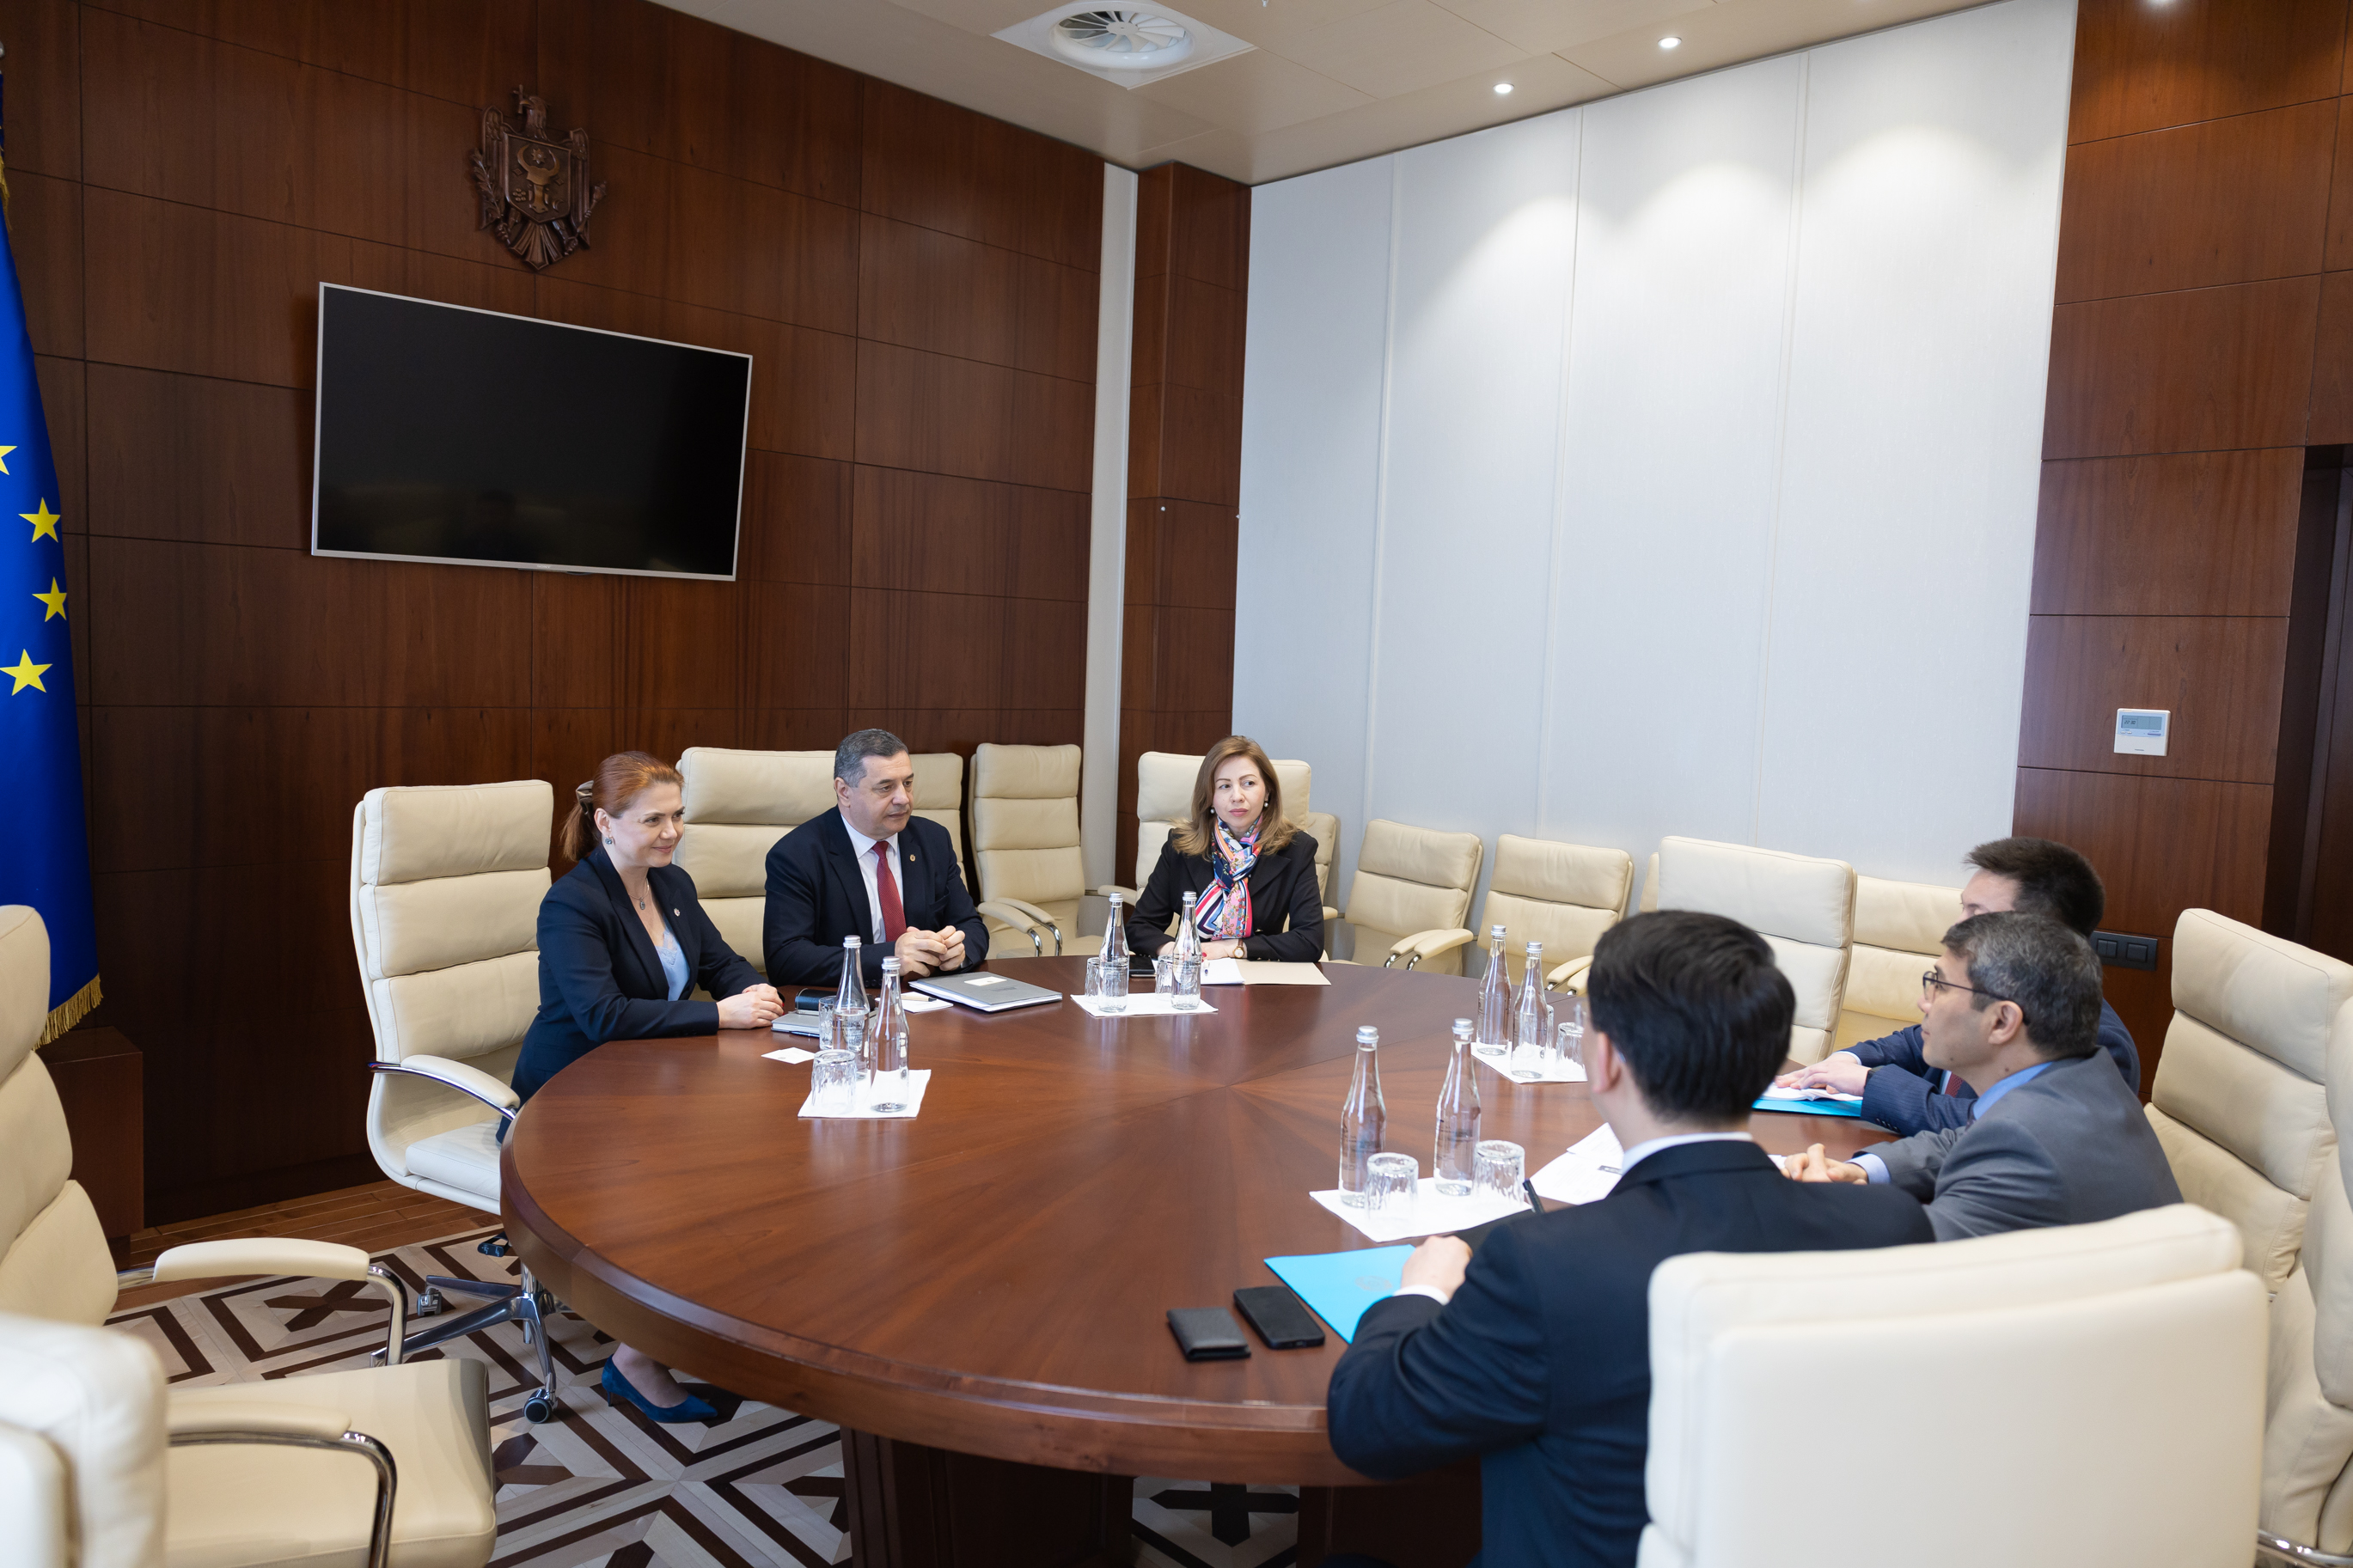 The key role of Kazakhstan in our region is noted  in the Moldovan Parliament